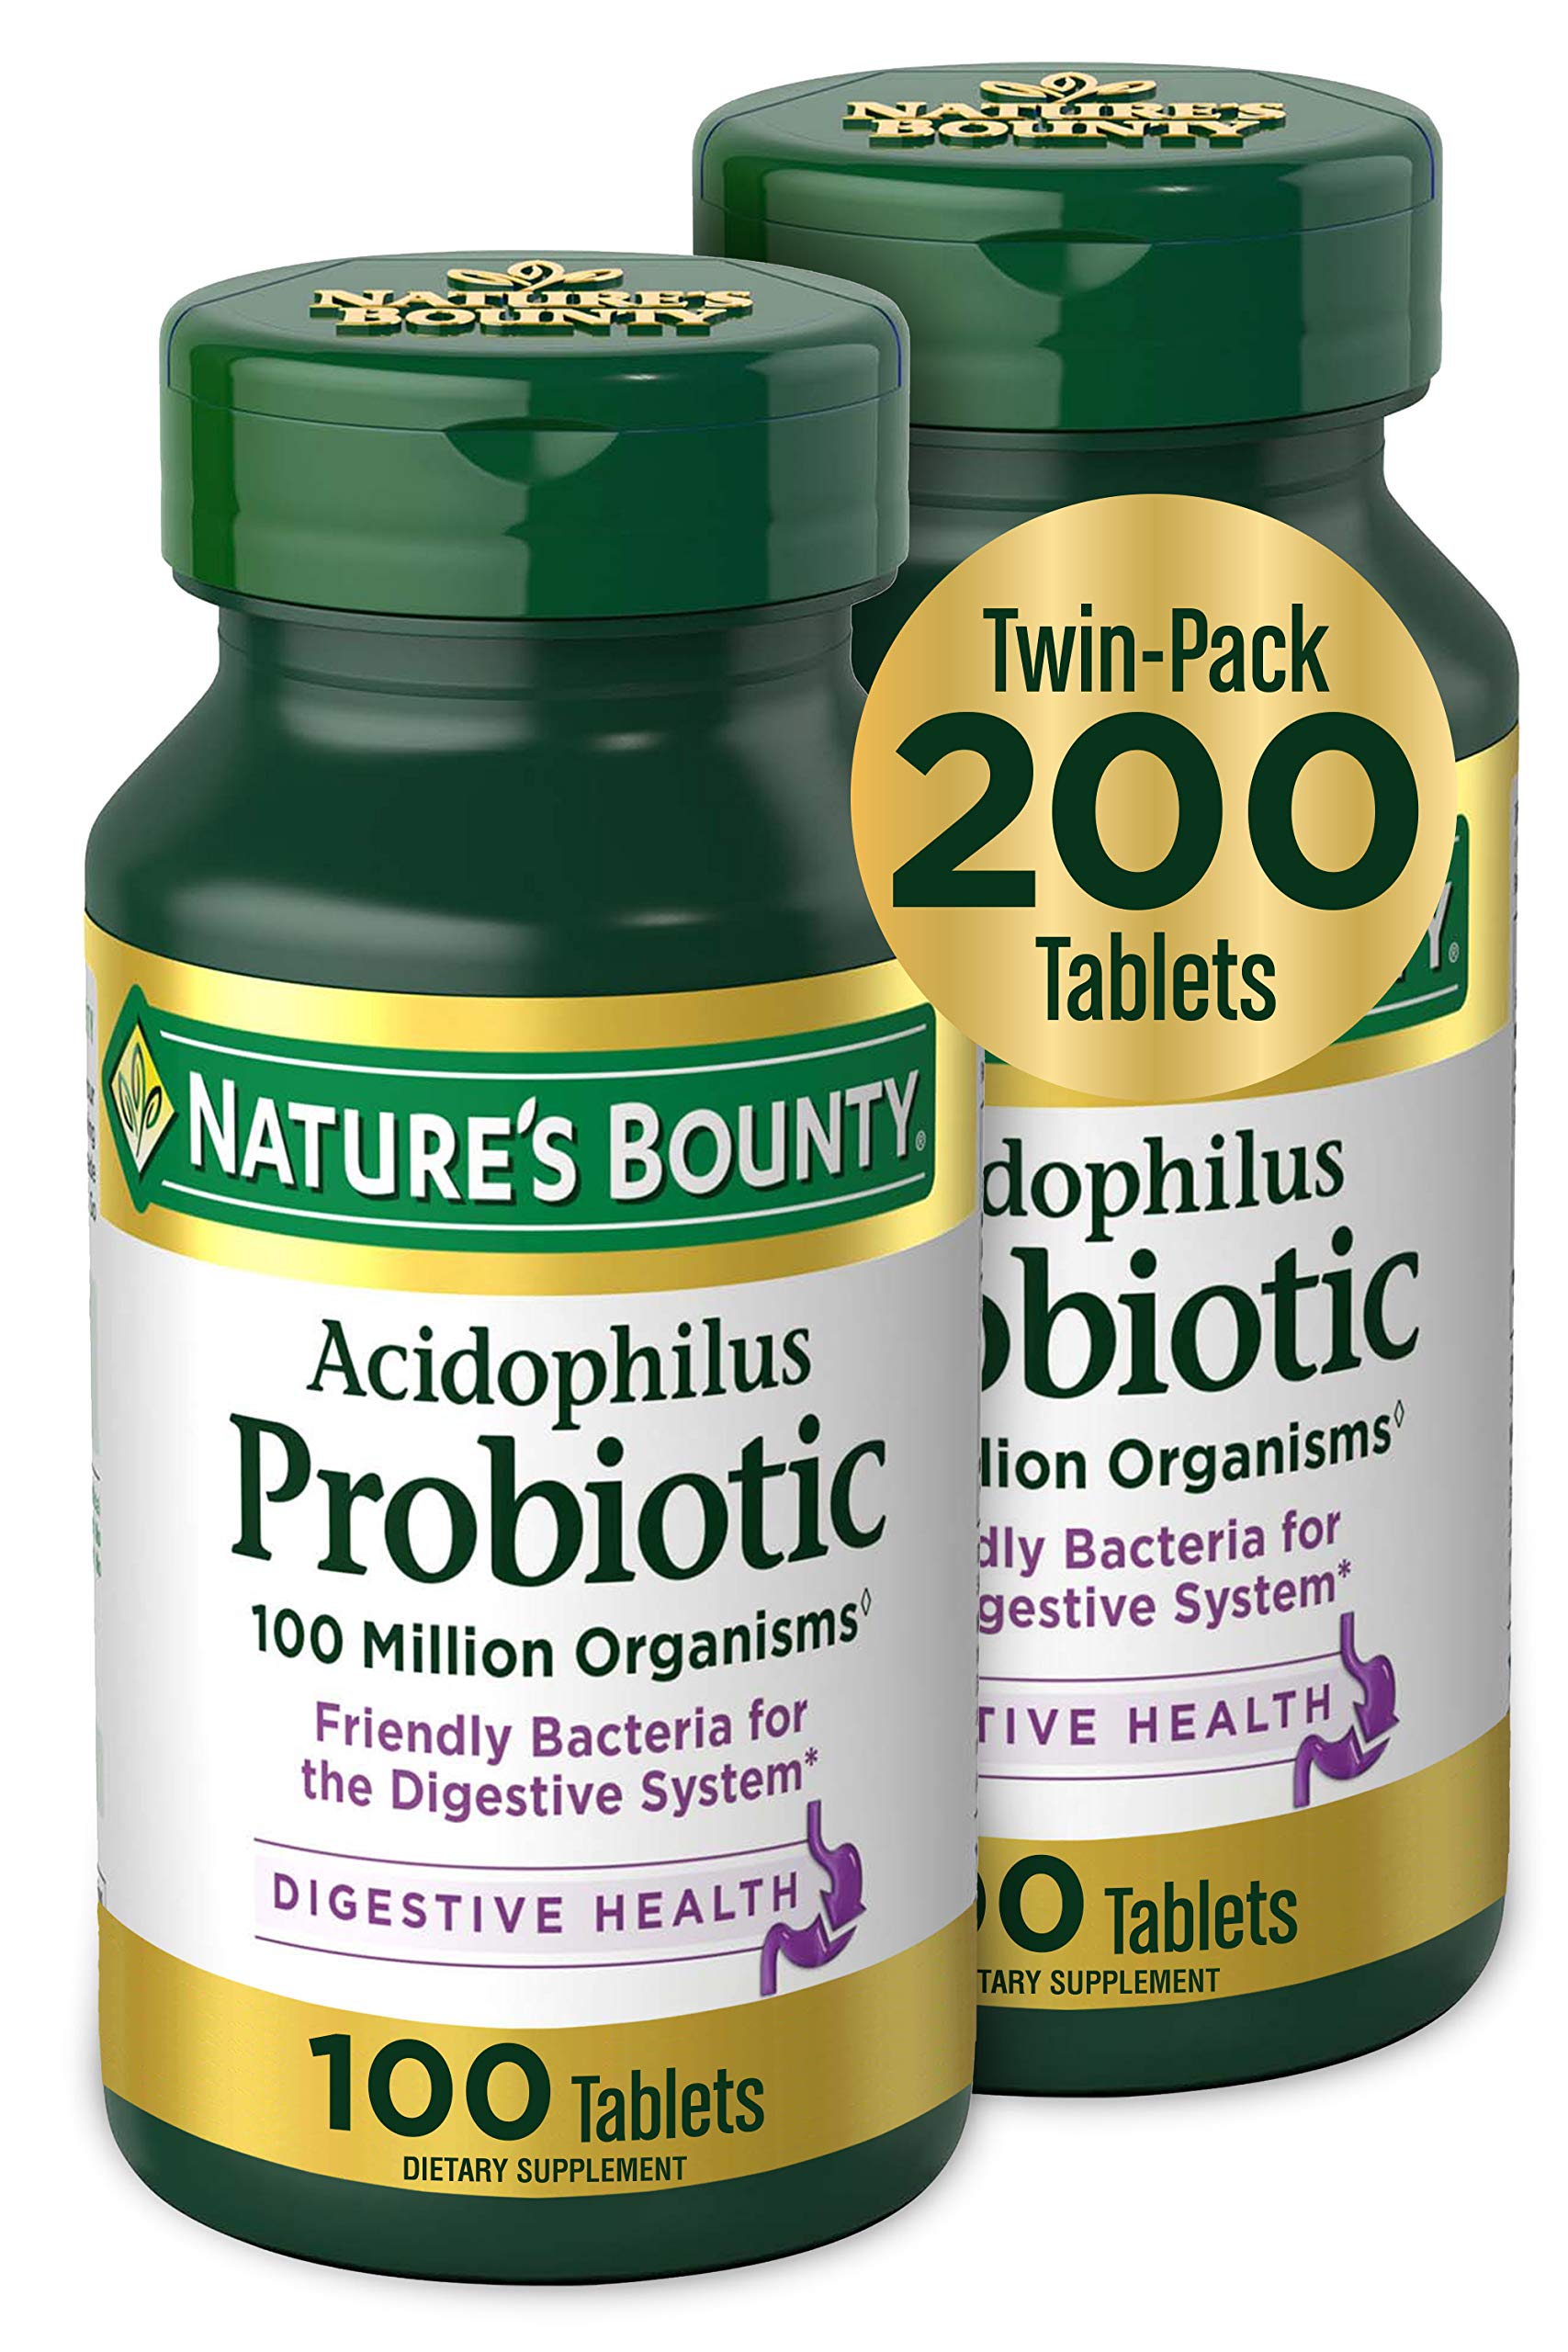 Nature's Bounty Acidophilus Probiotic, Twin pack $10.99